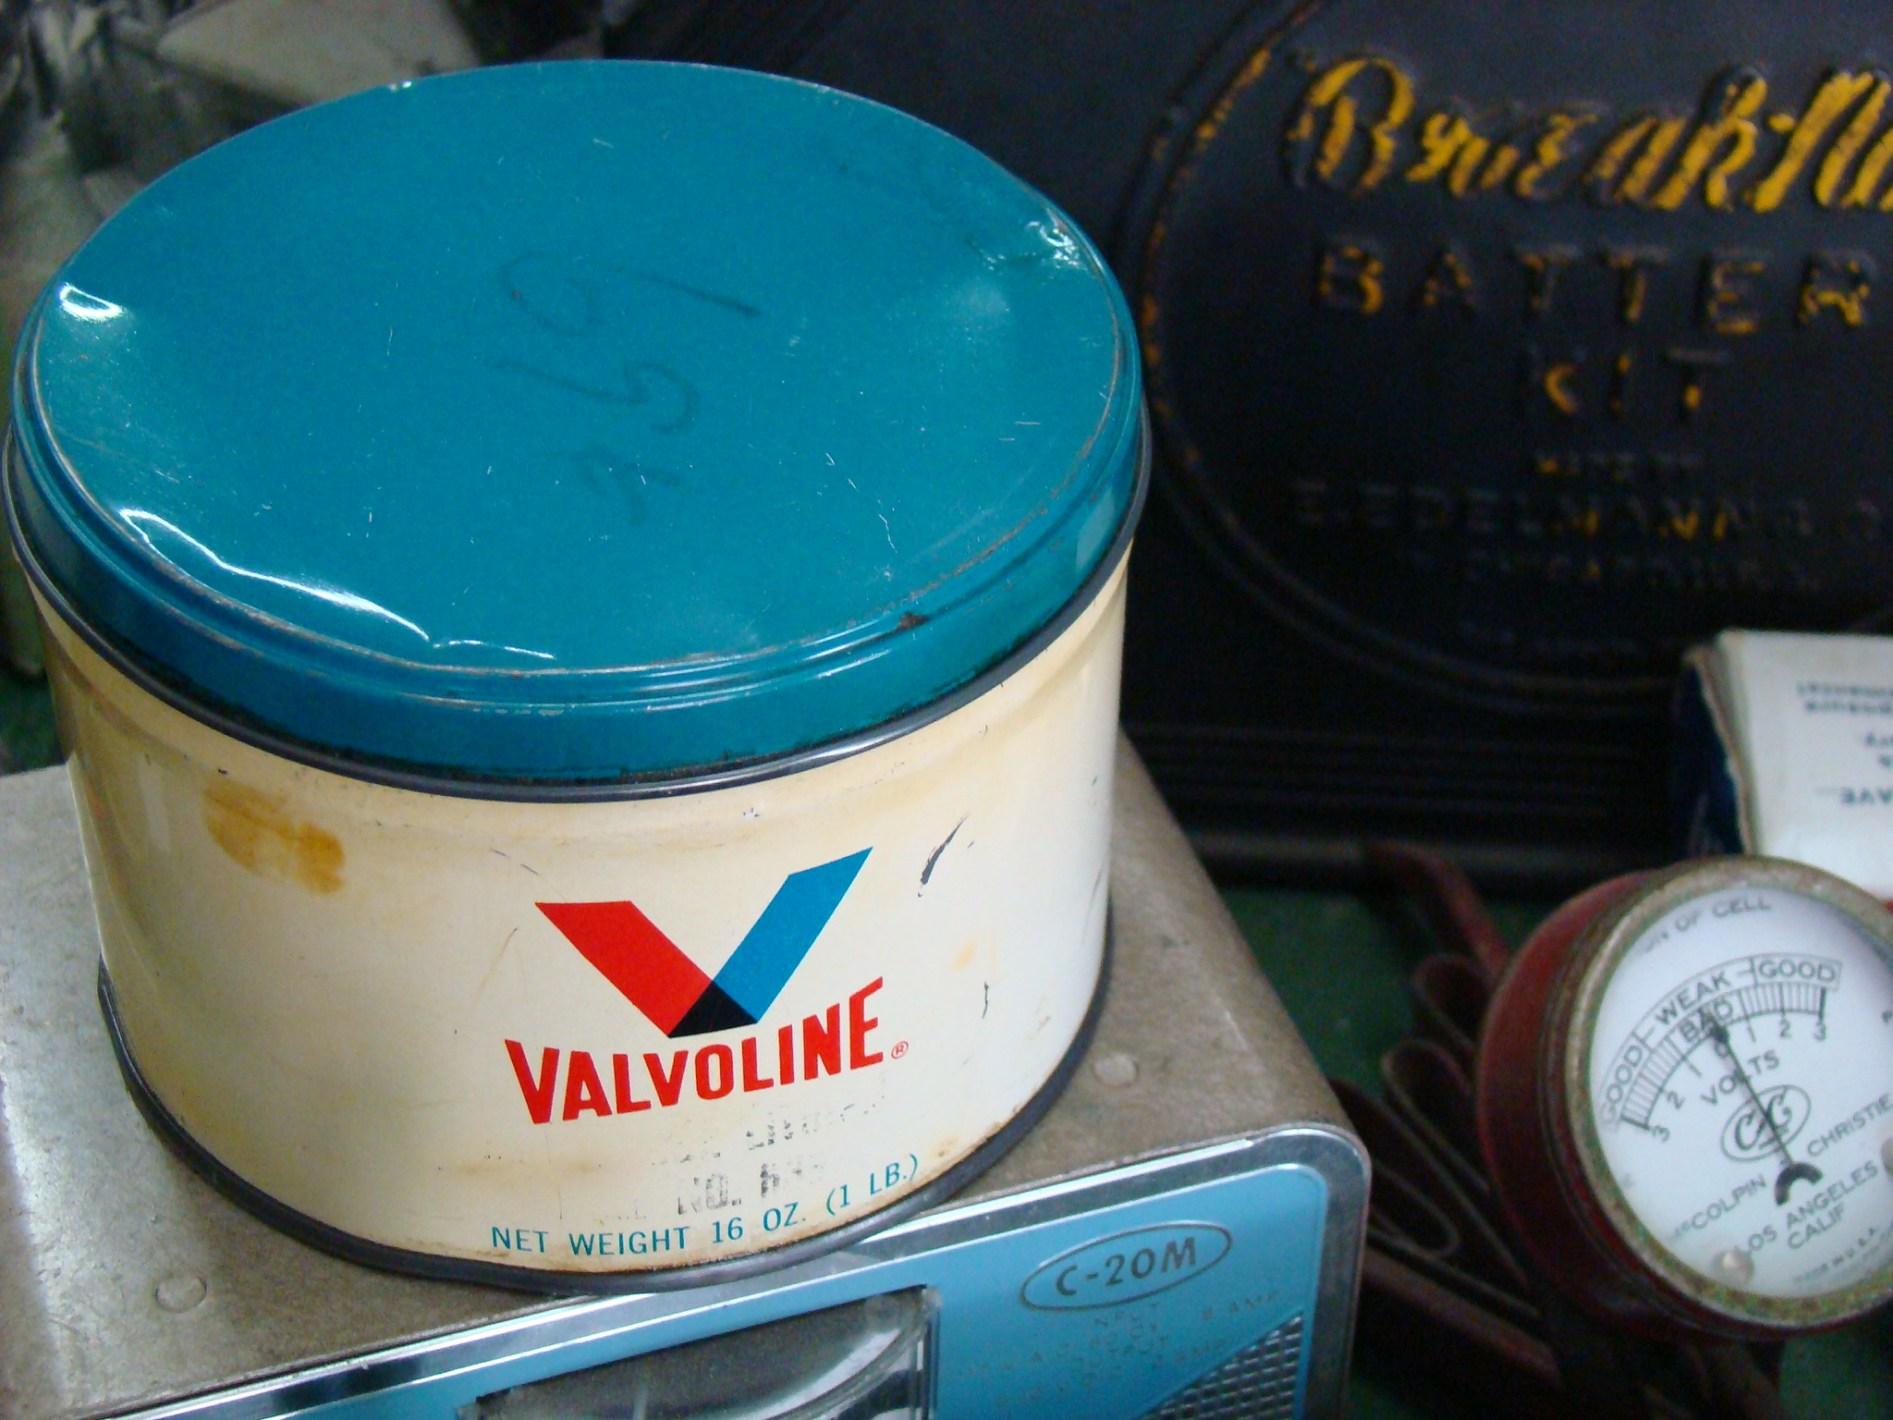 Valvoline Grease Can, One Pound 3 4 FULL